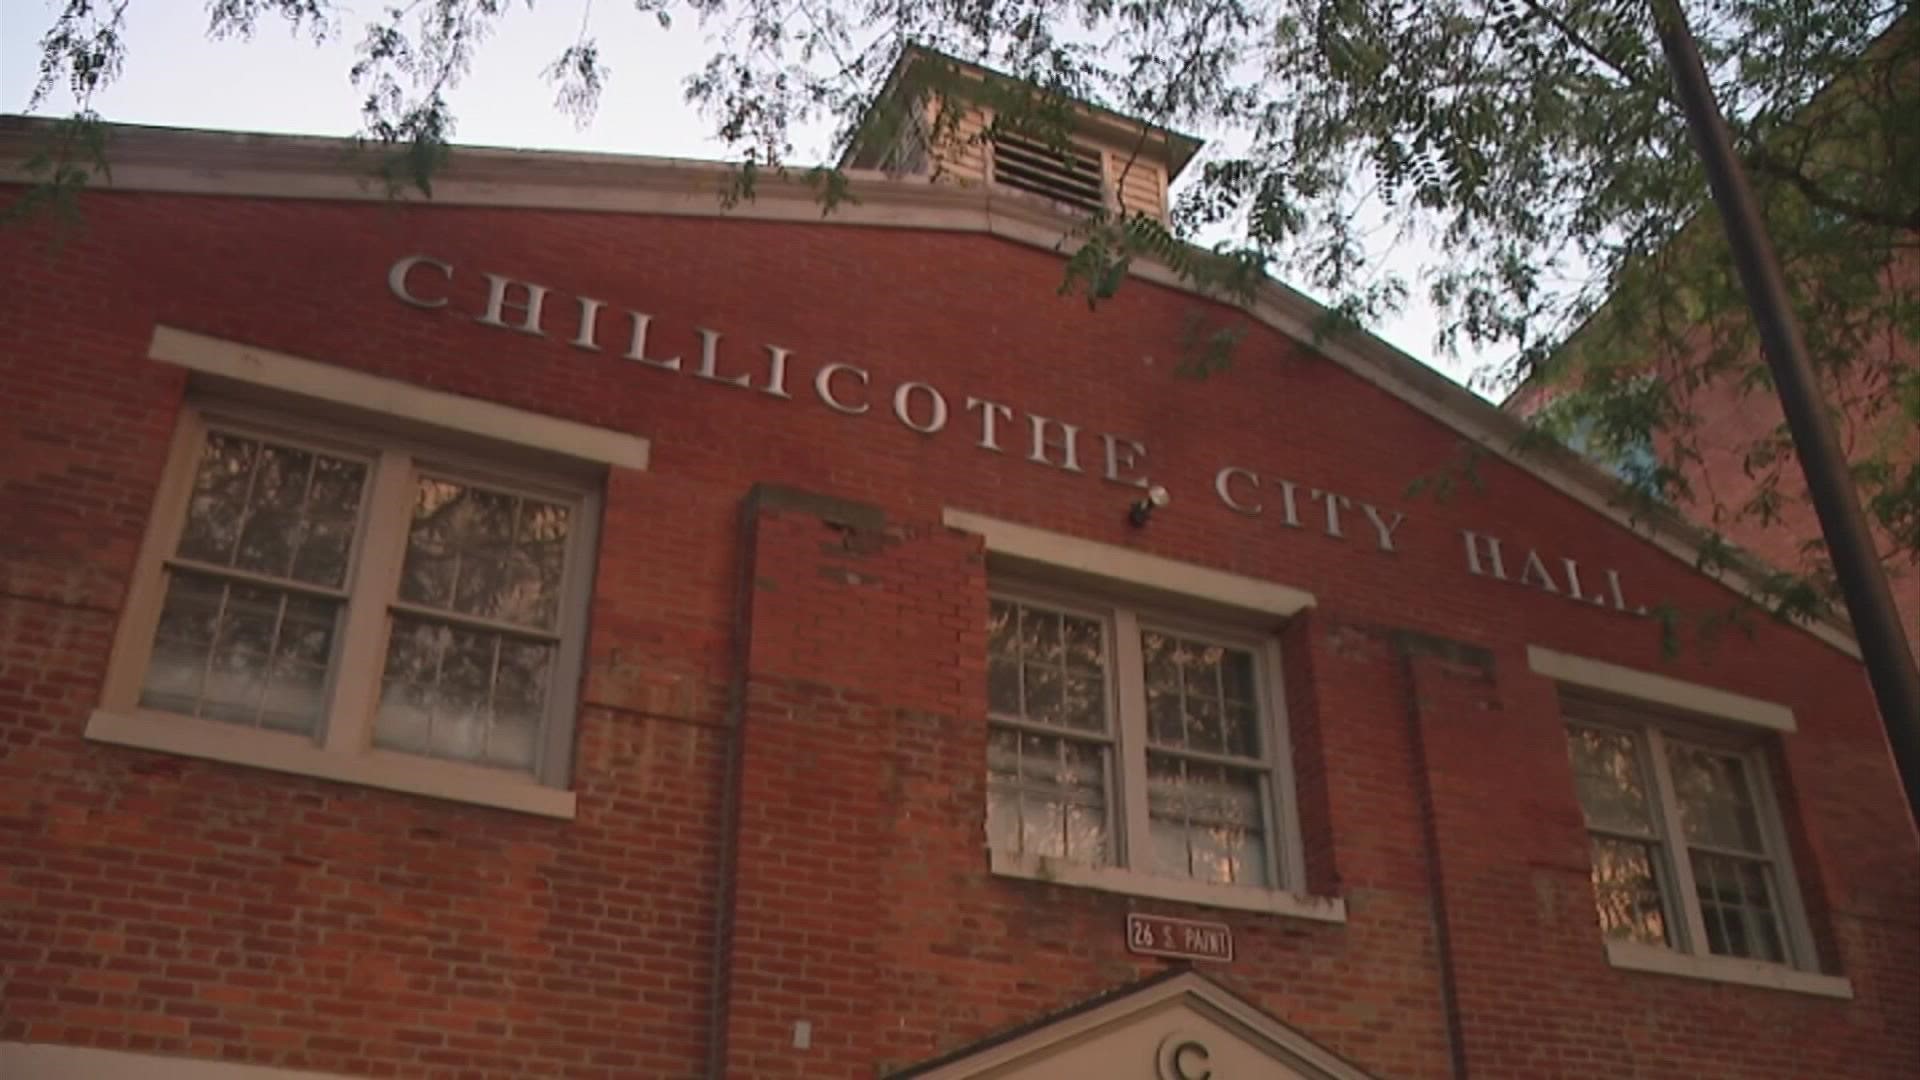 The City of Chillicothe is looking to stop anyone from being allowed to camp or sleep overnight on city property.